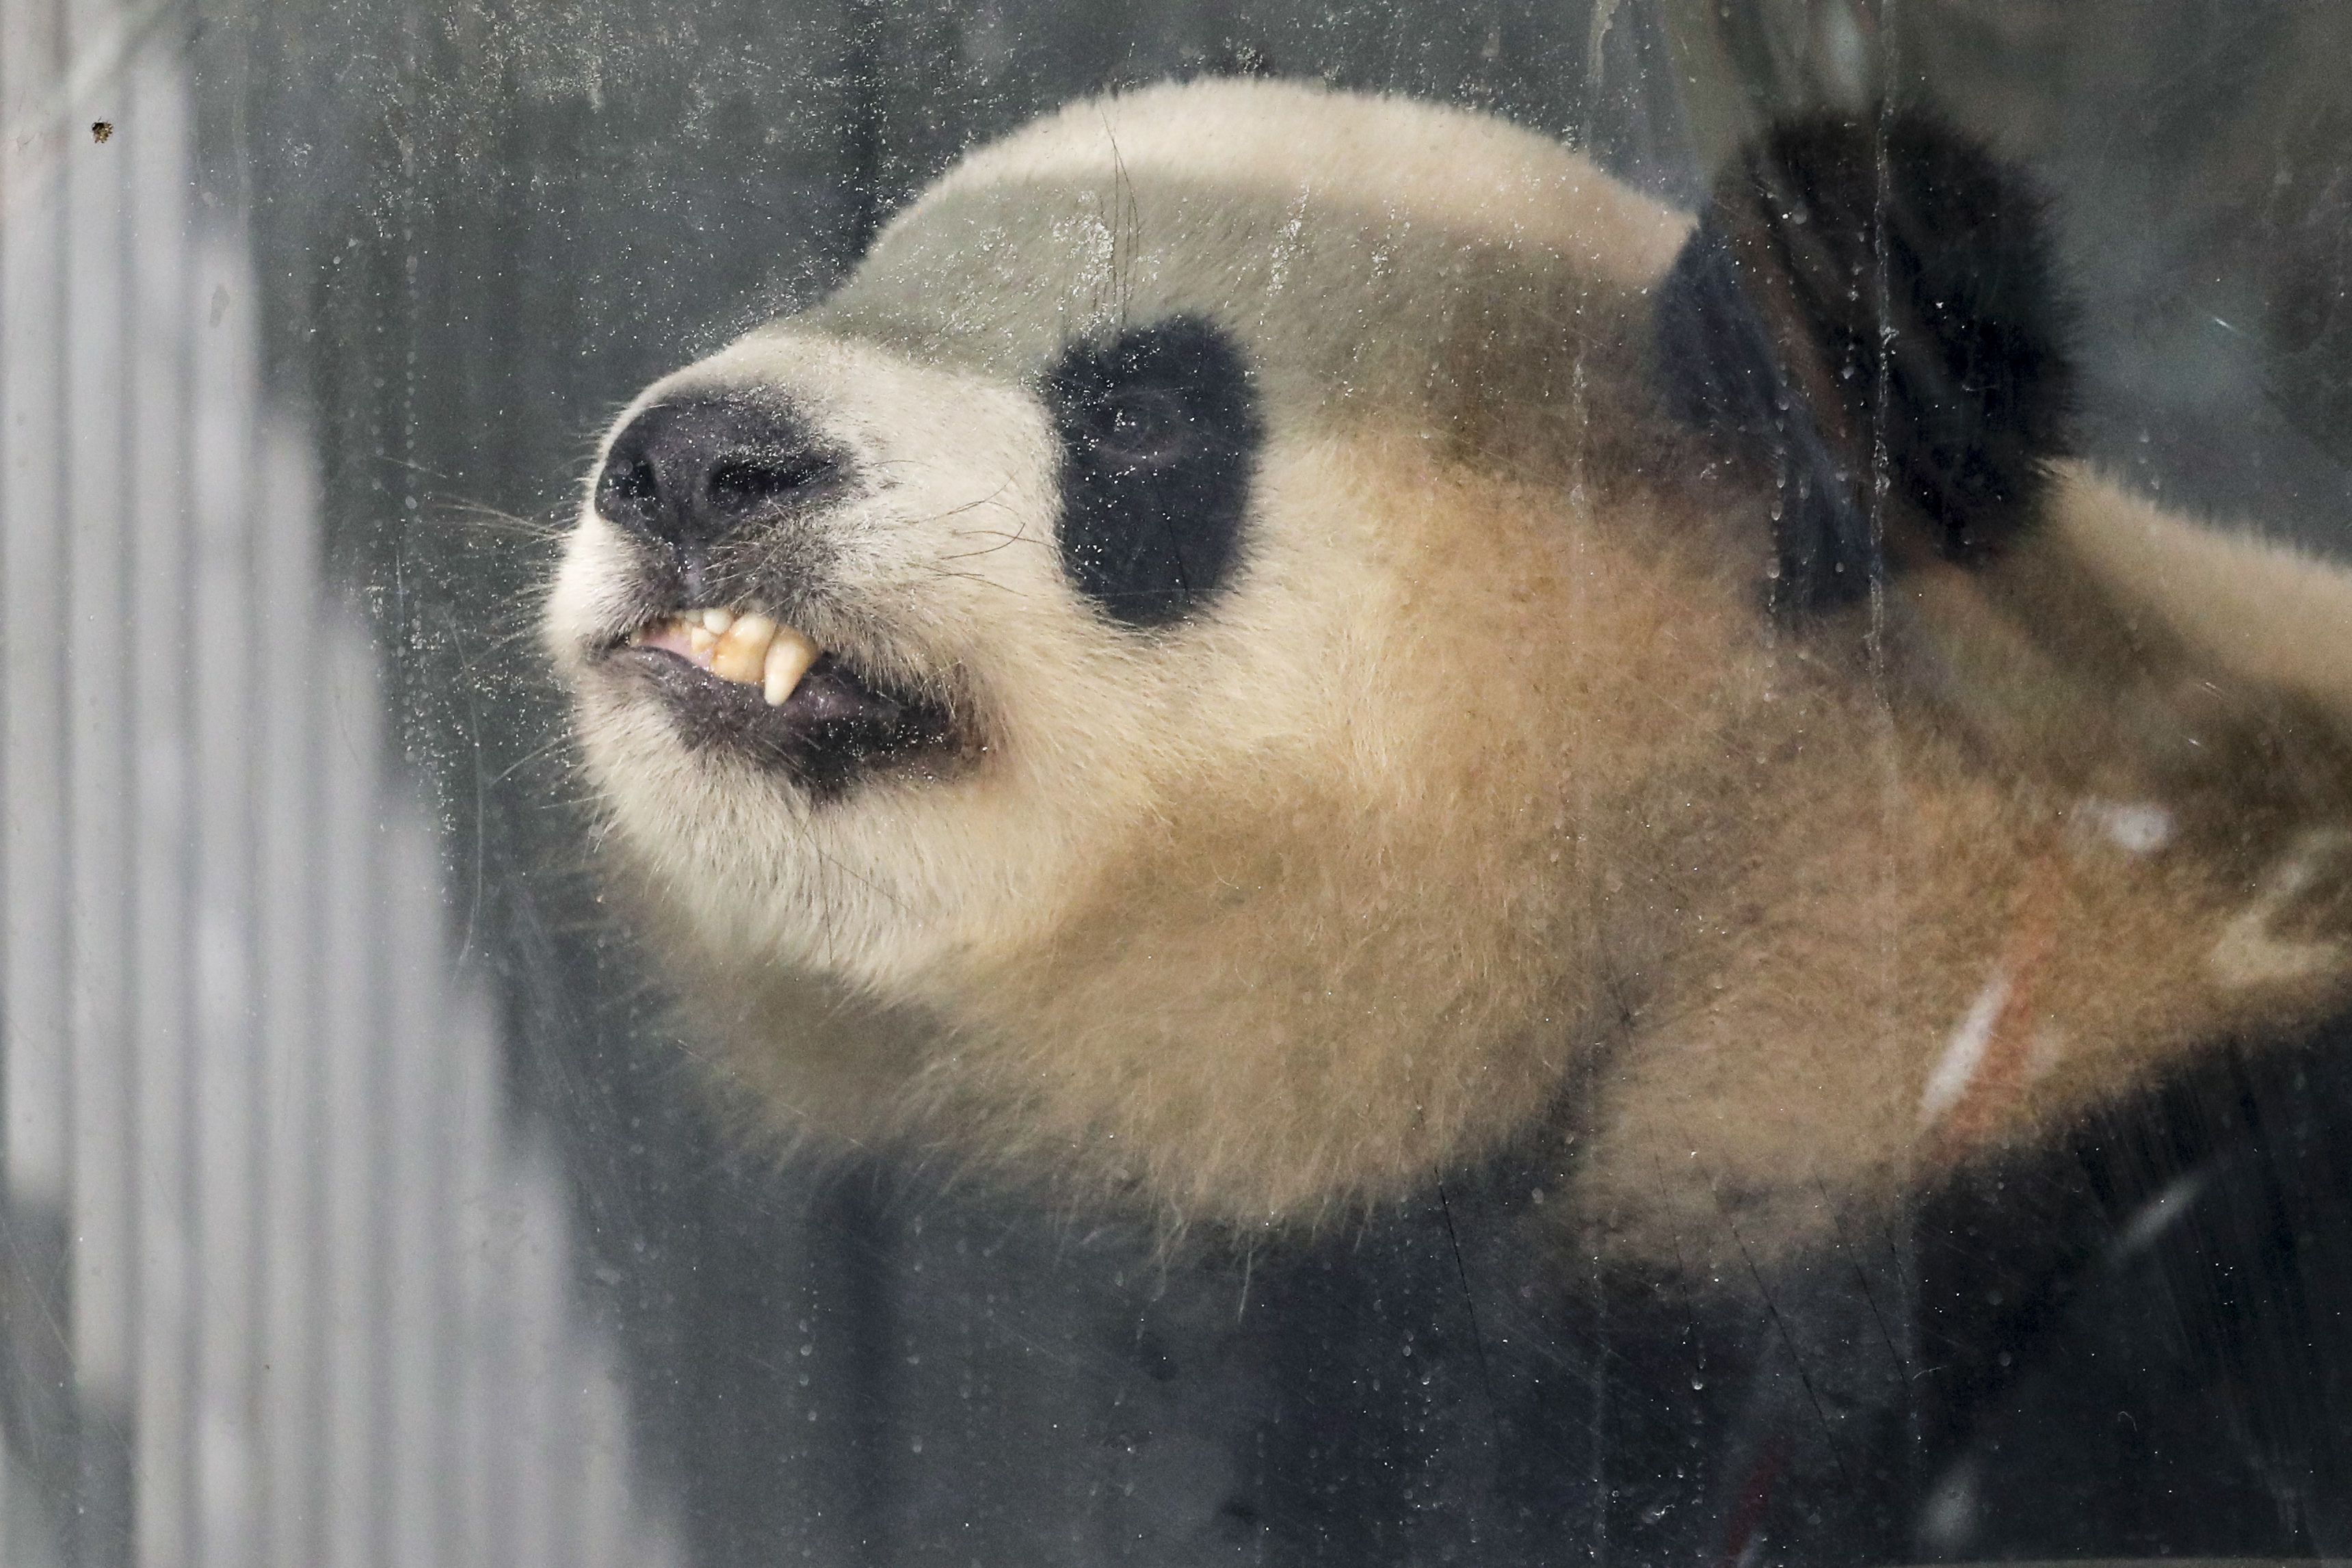 Berlin gives celebrity welcome to 2 giant pandas from China | KSNV3439 x 2293